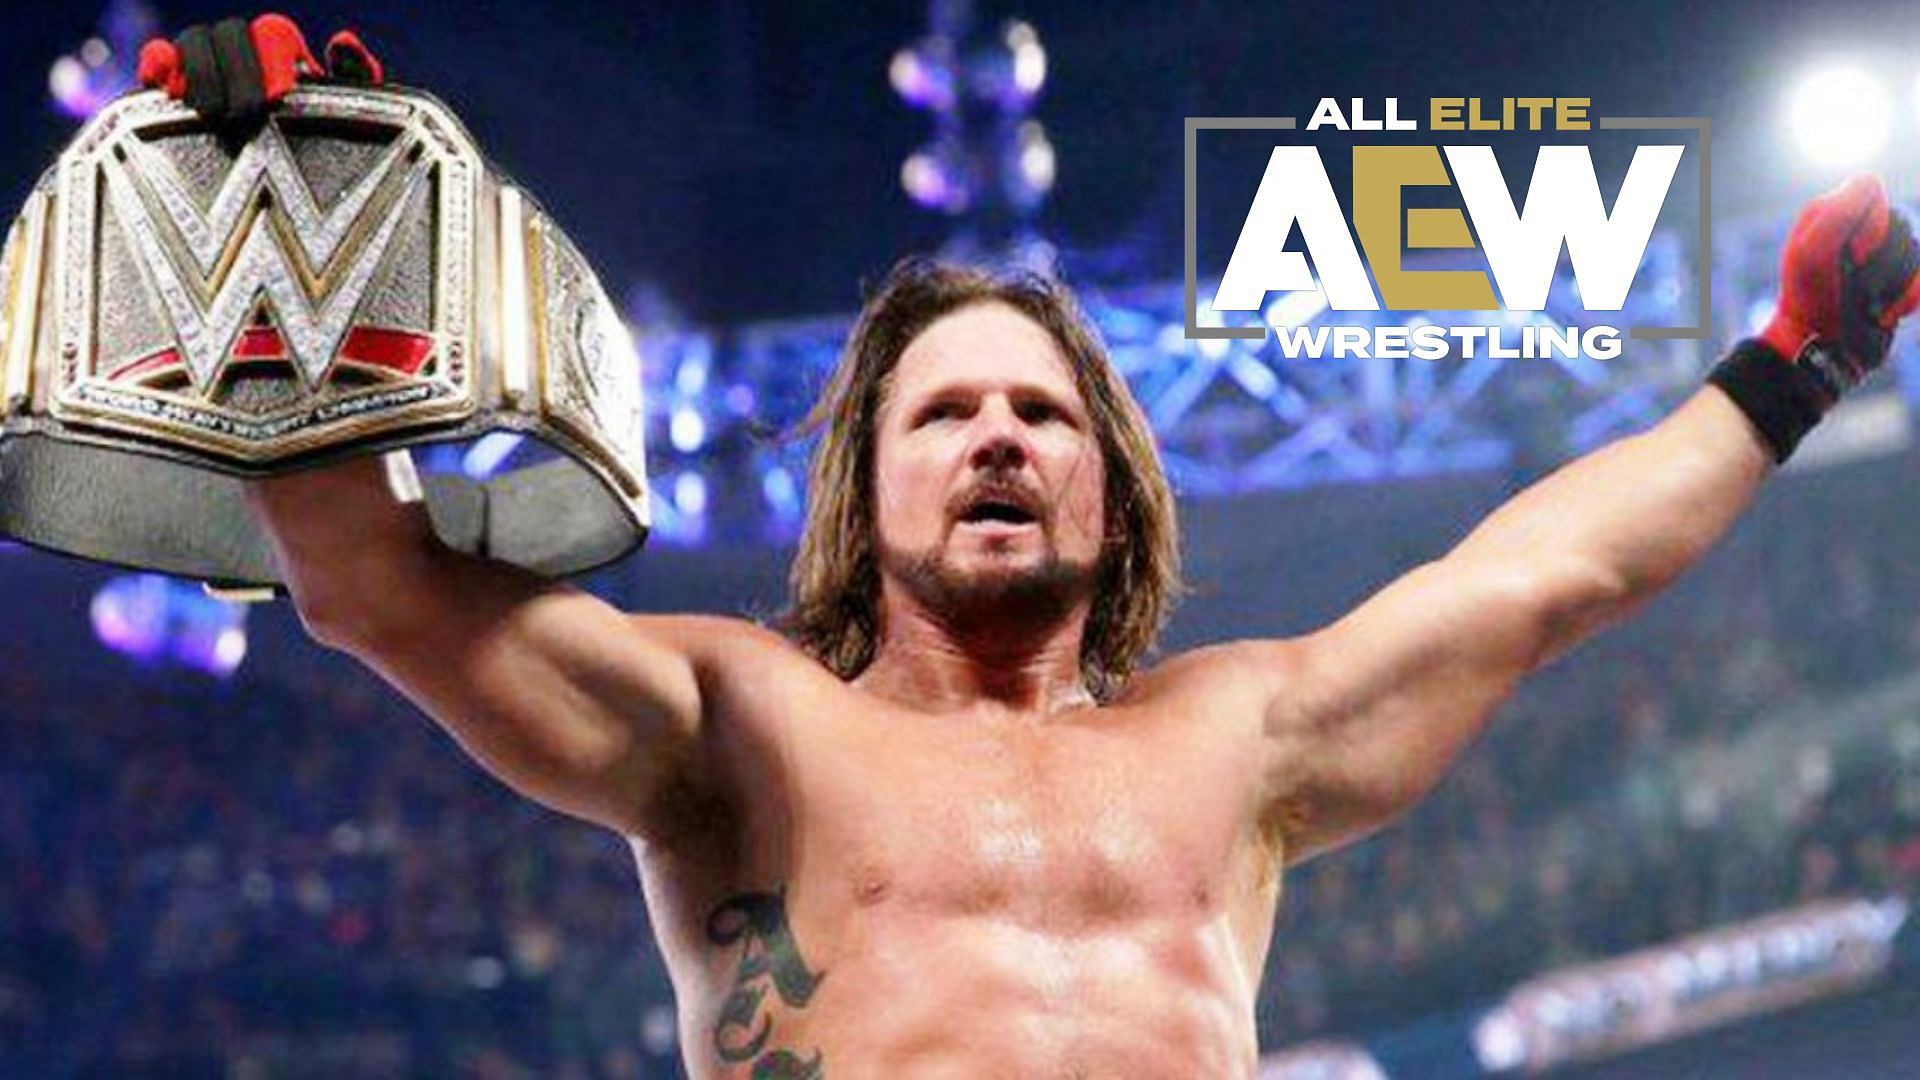 AJ Styles was recently mentioned by an AEW star in a media scrum